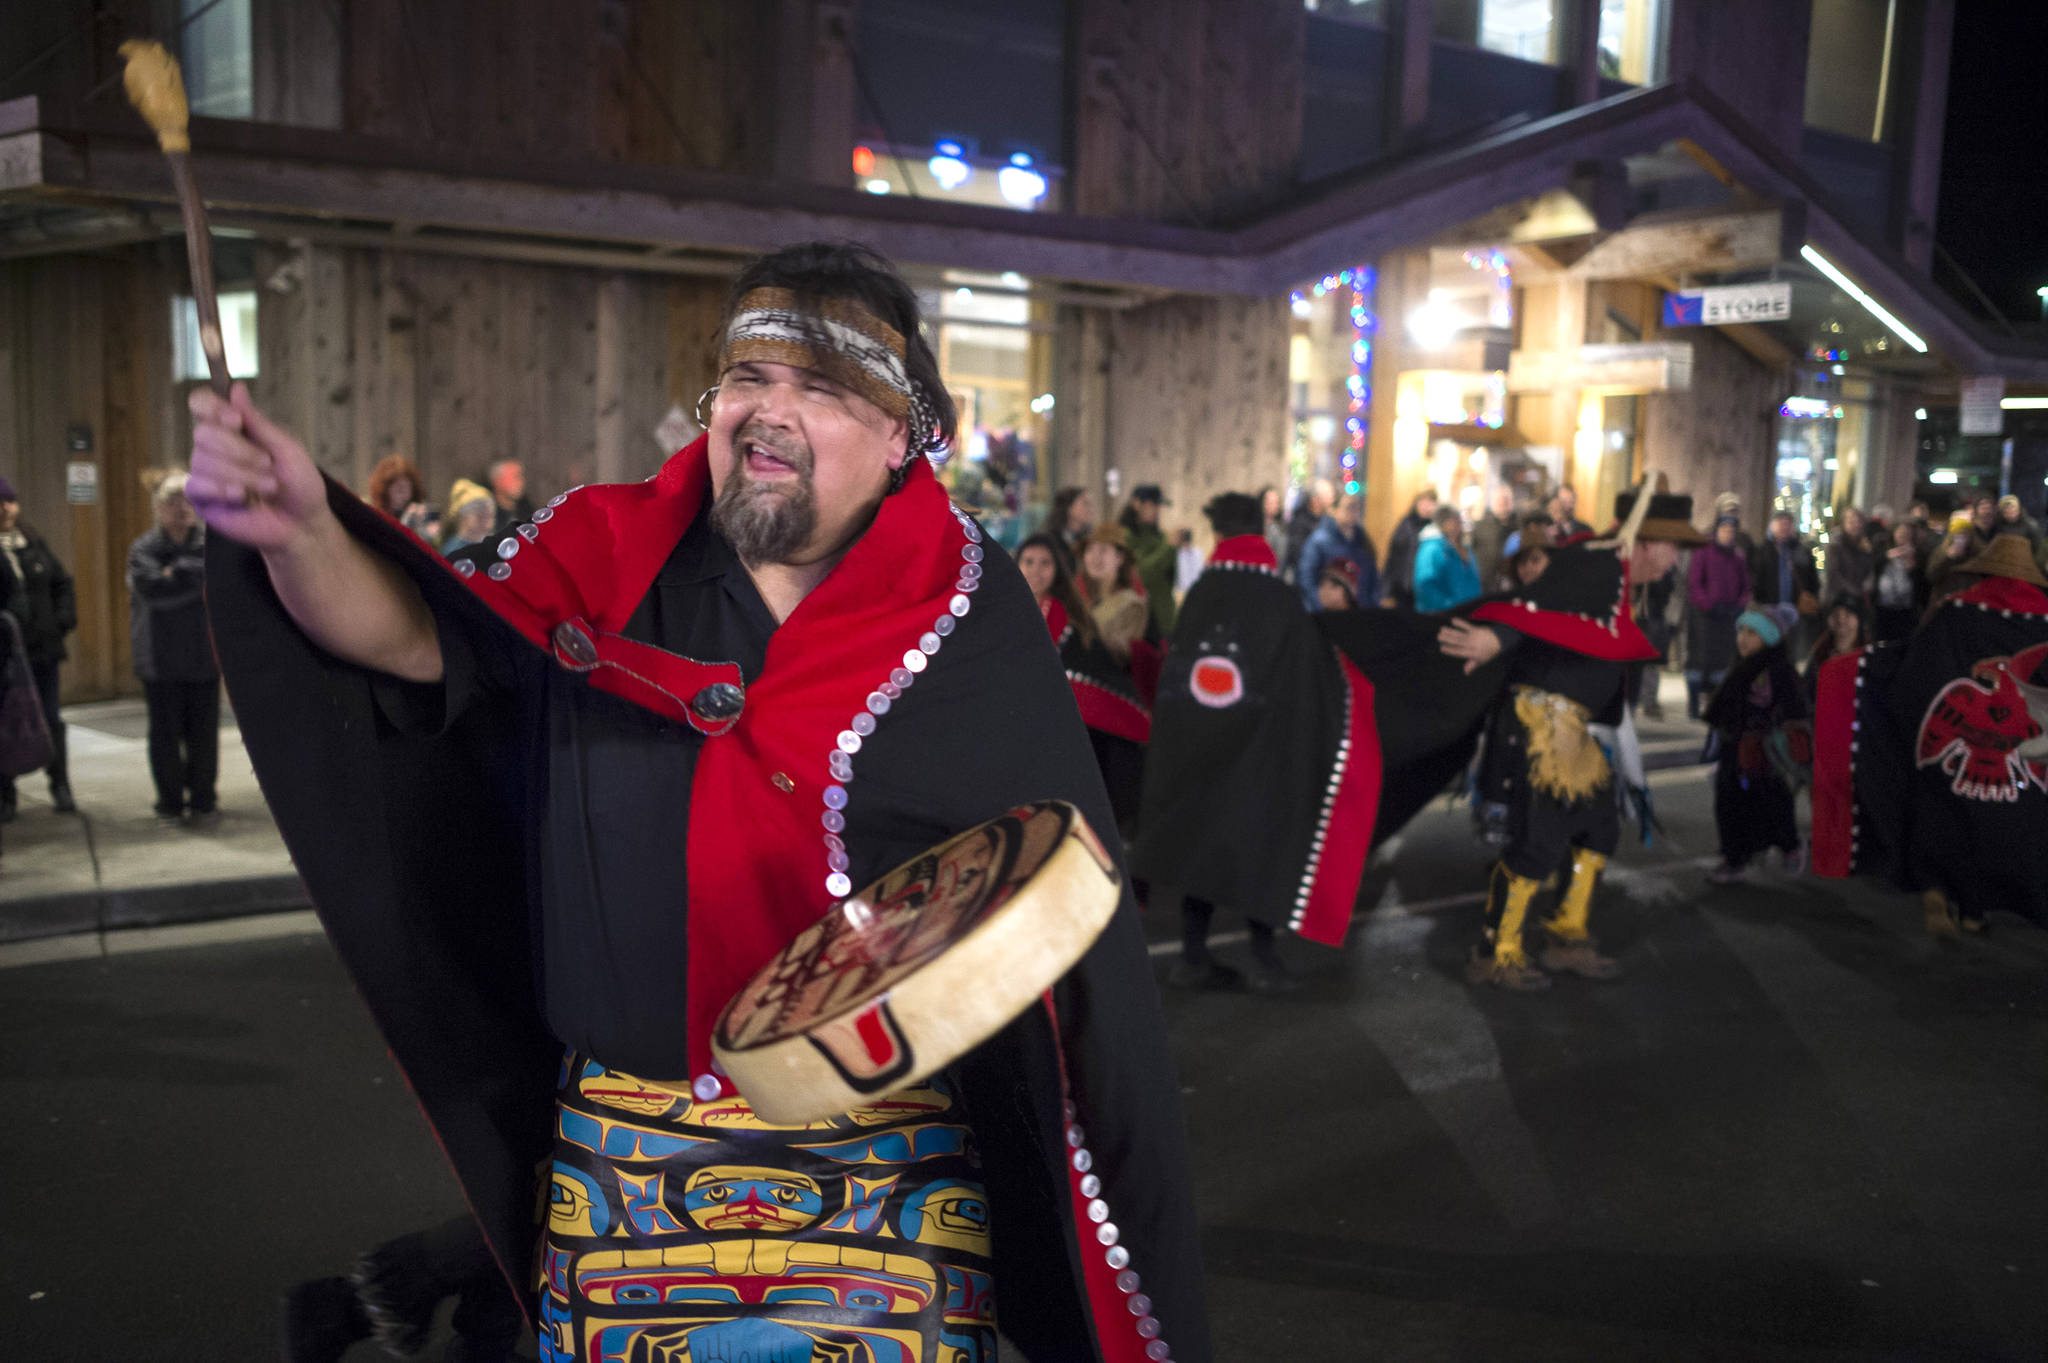 Alfie Price dances with the multicultural dance group Yees Ku Oo on Front Street during Gallery Walk on Friday, Dec. 7, 2018. (Michael Penn | Juneau Empire)